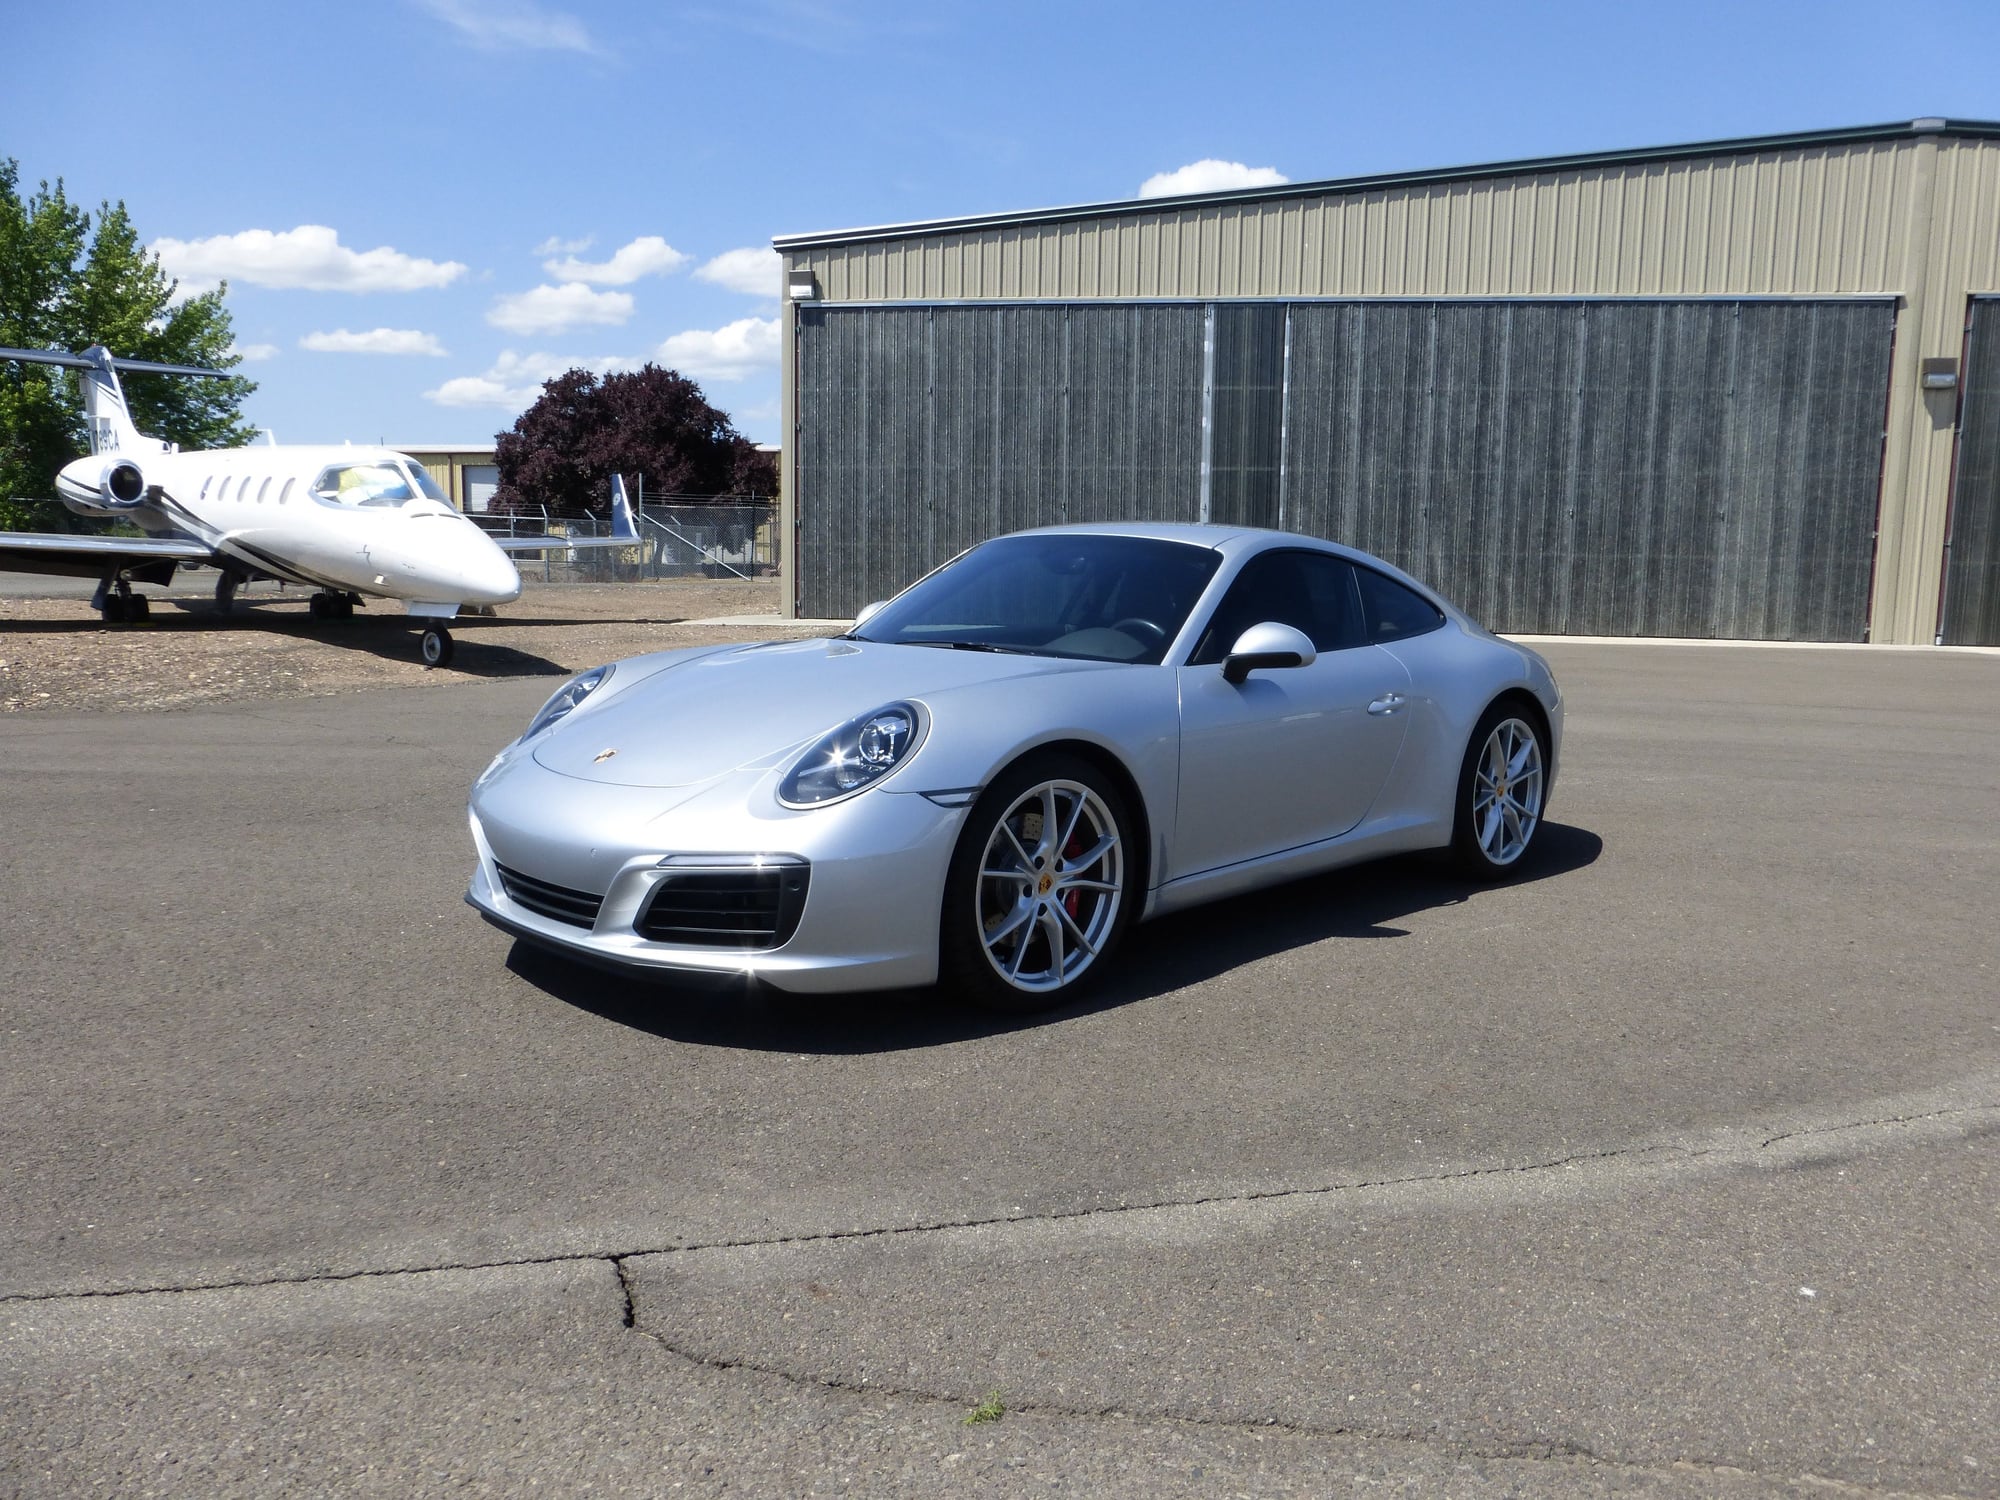 2018 Porsche 911 - 2018 Carrer S - Used - VIN WP0AB2A90JS123522 - 24,640 Miles - 6 cyl - 2WD - Automatic - Coupe - Silver - Medford, OR 97501, United States